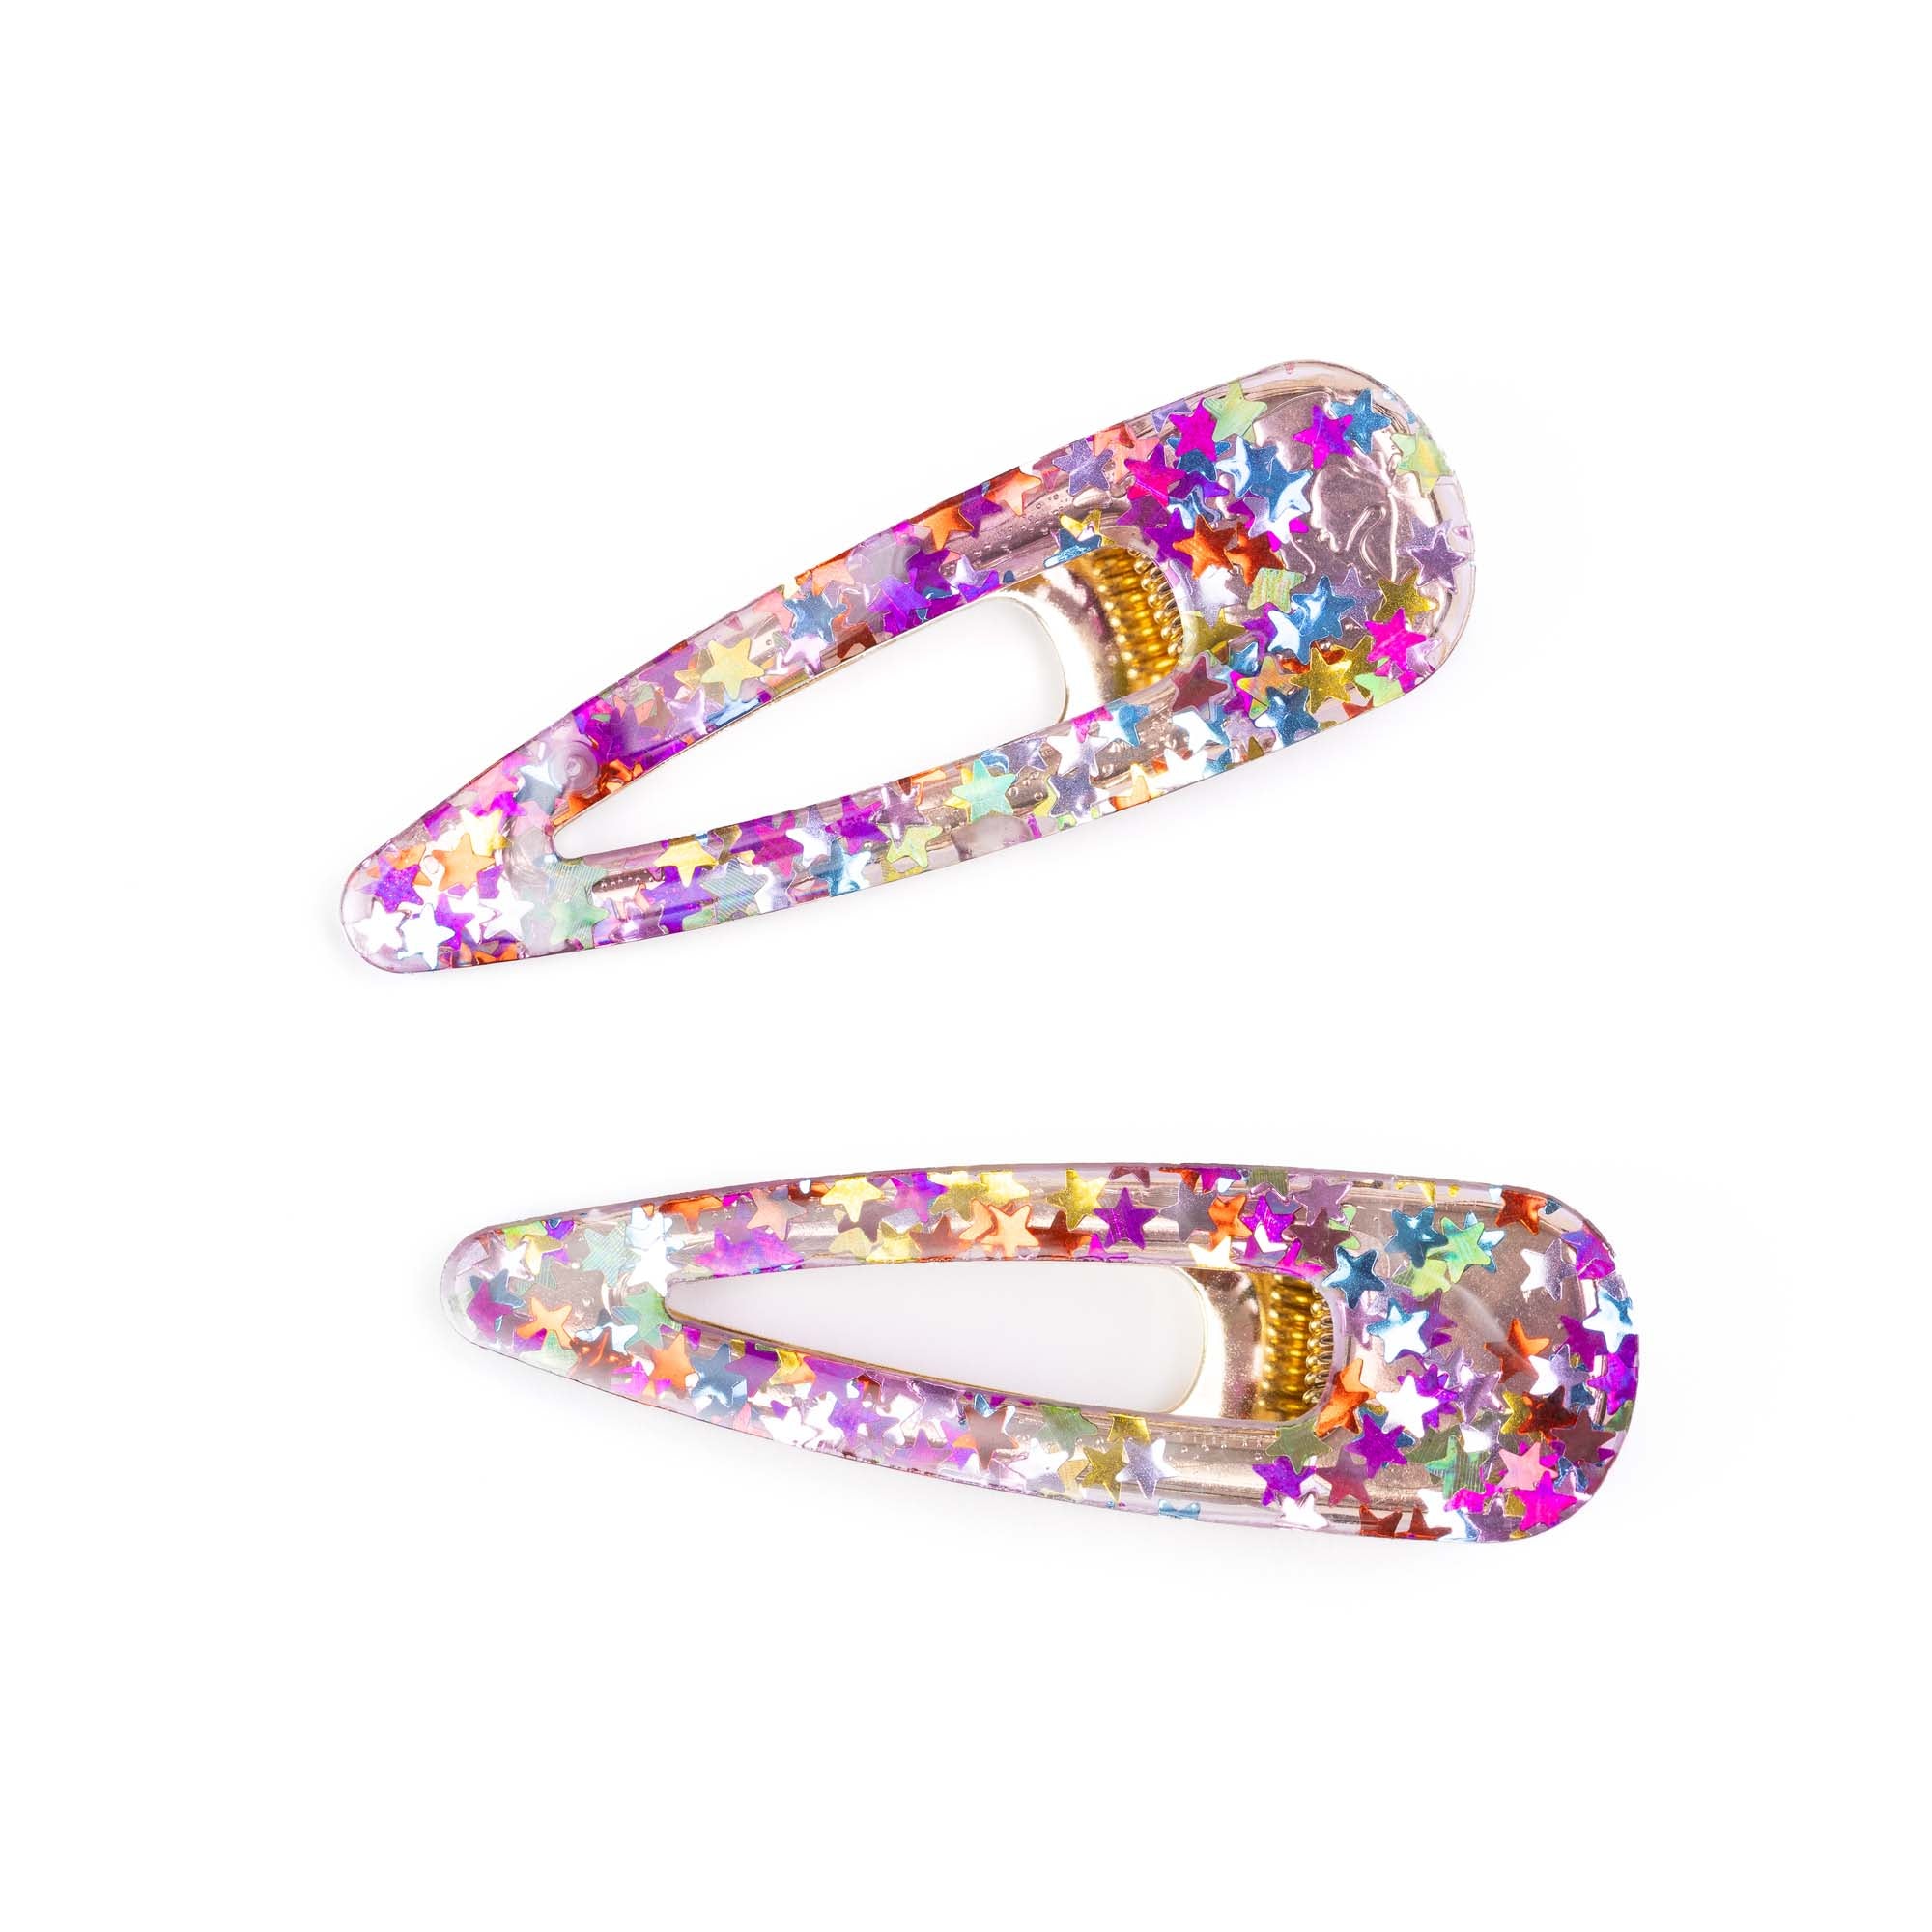 Boutique Gel Sparkle Hairclips for kids, 2 count